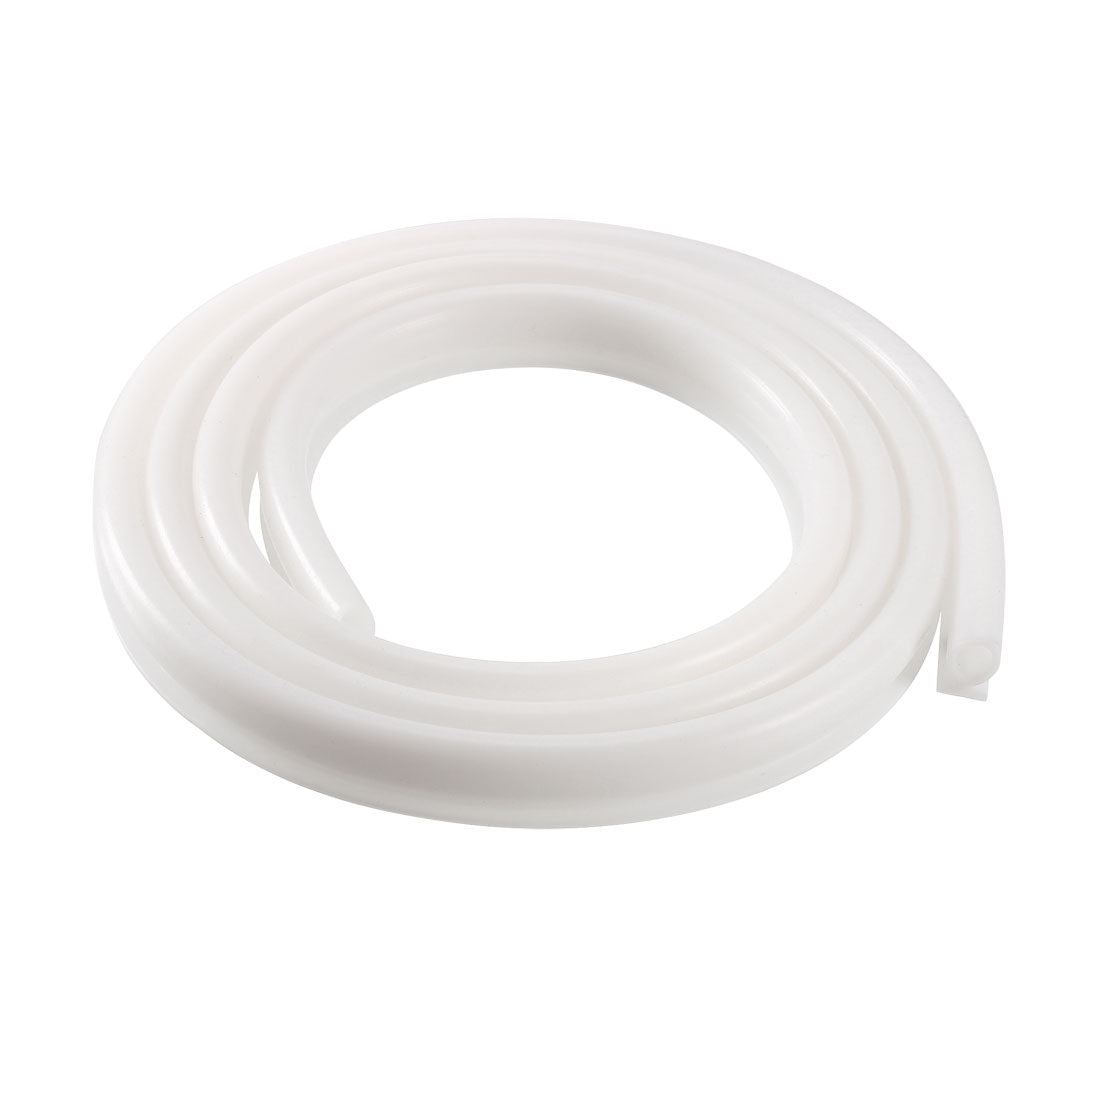 uxcell Uxcell T-Slot Mount Weatherstrip Seal 7mm Bulb Bubble for 6mm Slot 1 Meter White